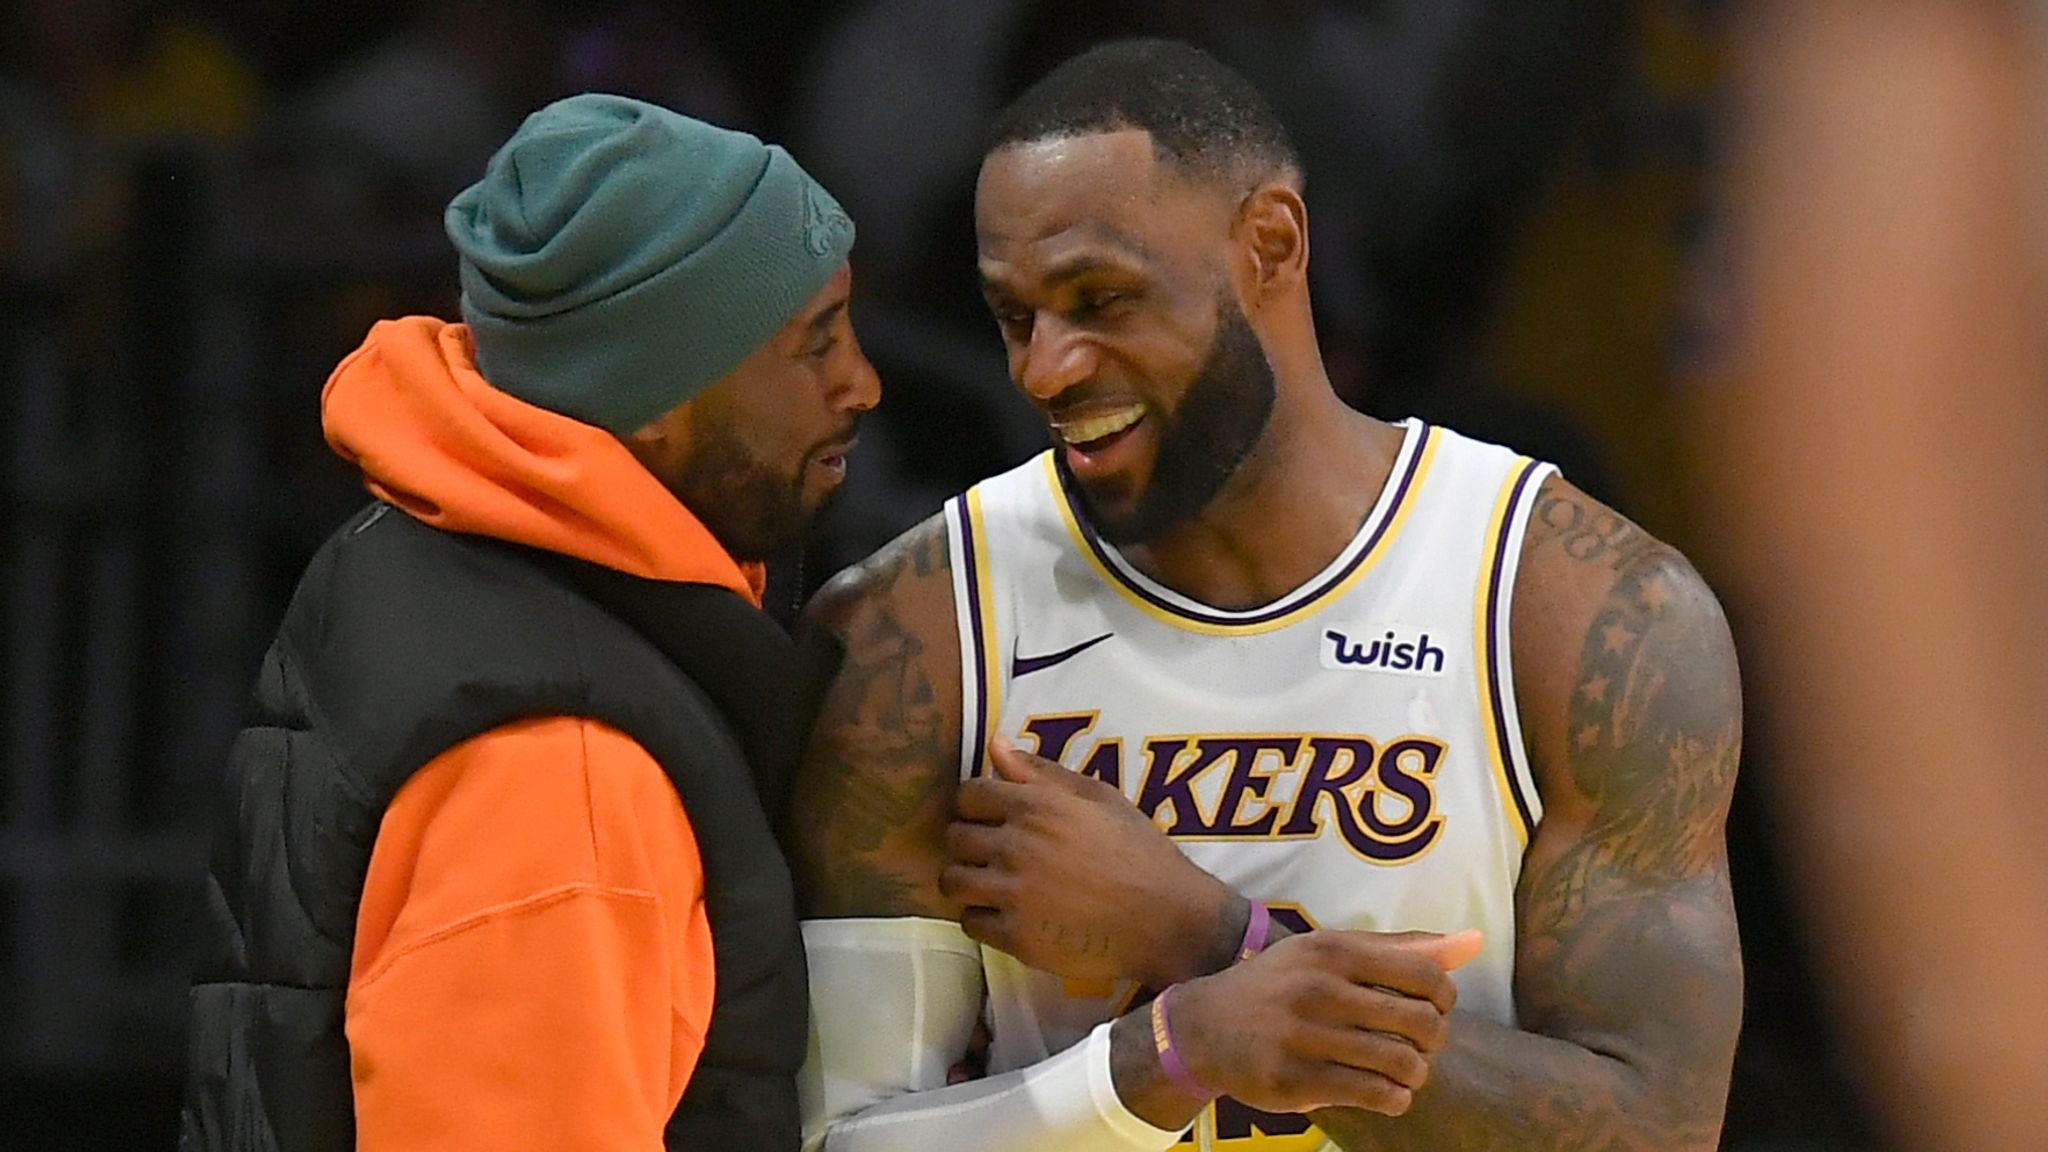 LeBron James says Kobe Bryant remains in thoughts of NBA players